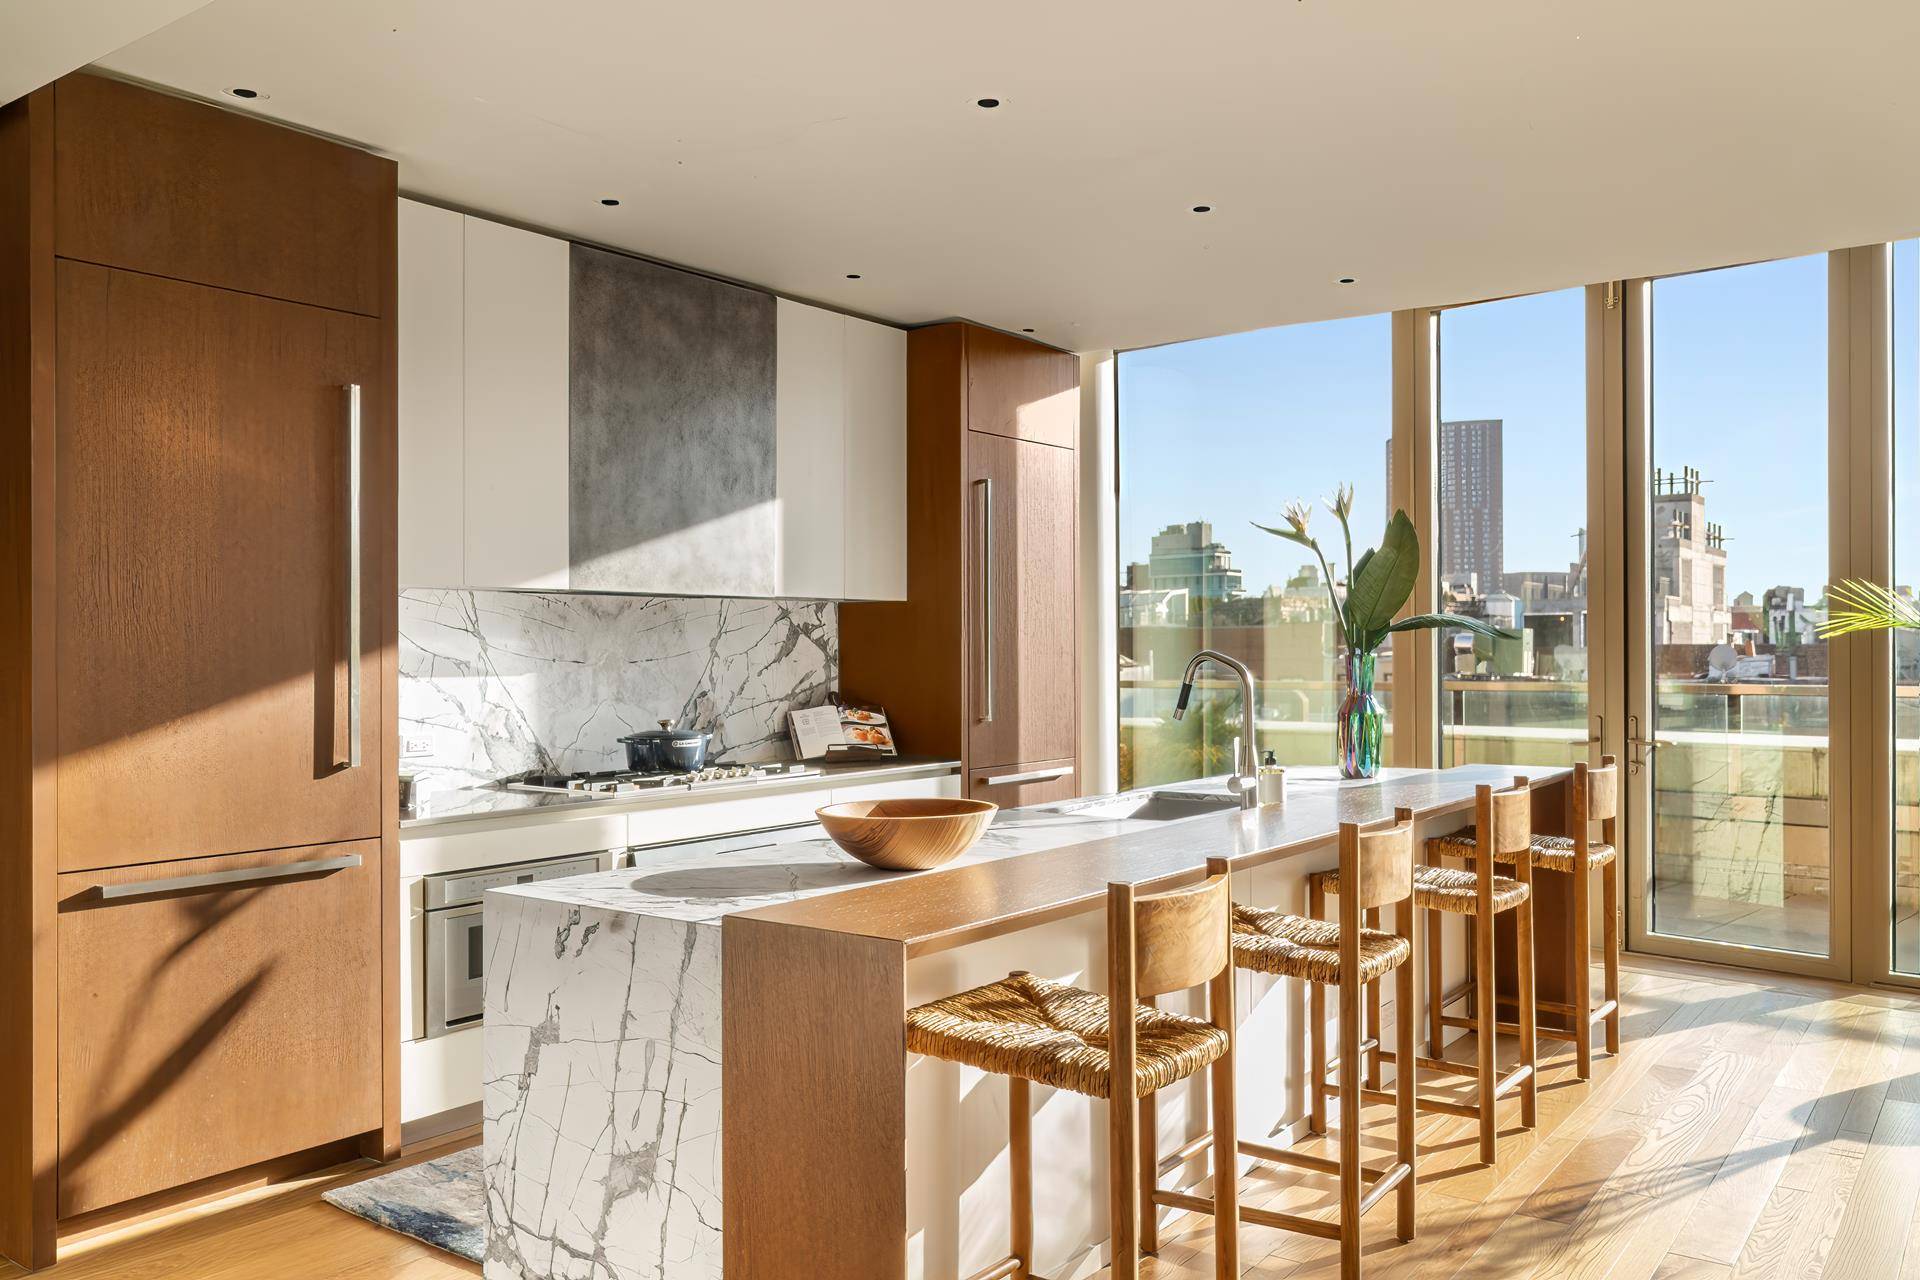 Presenting Penthouse A The One and Only Four Bedroom Penthouse Residence at Andre Kikoski amp ; Kravitz Design's NoLita Masterpiece.